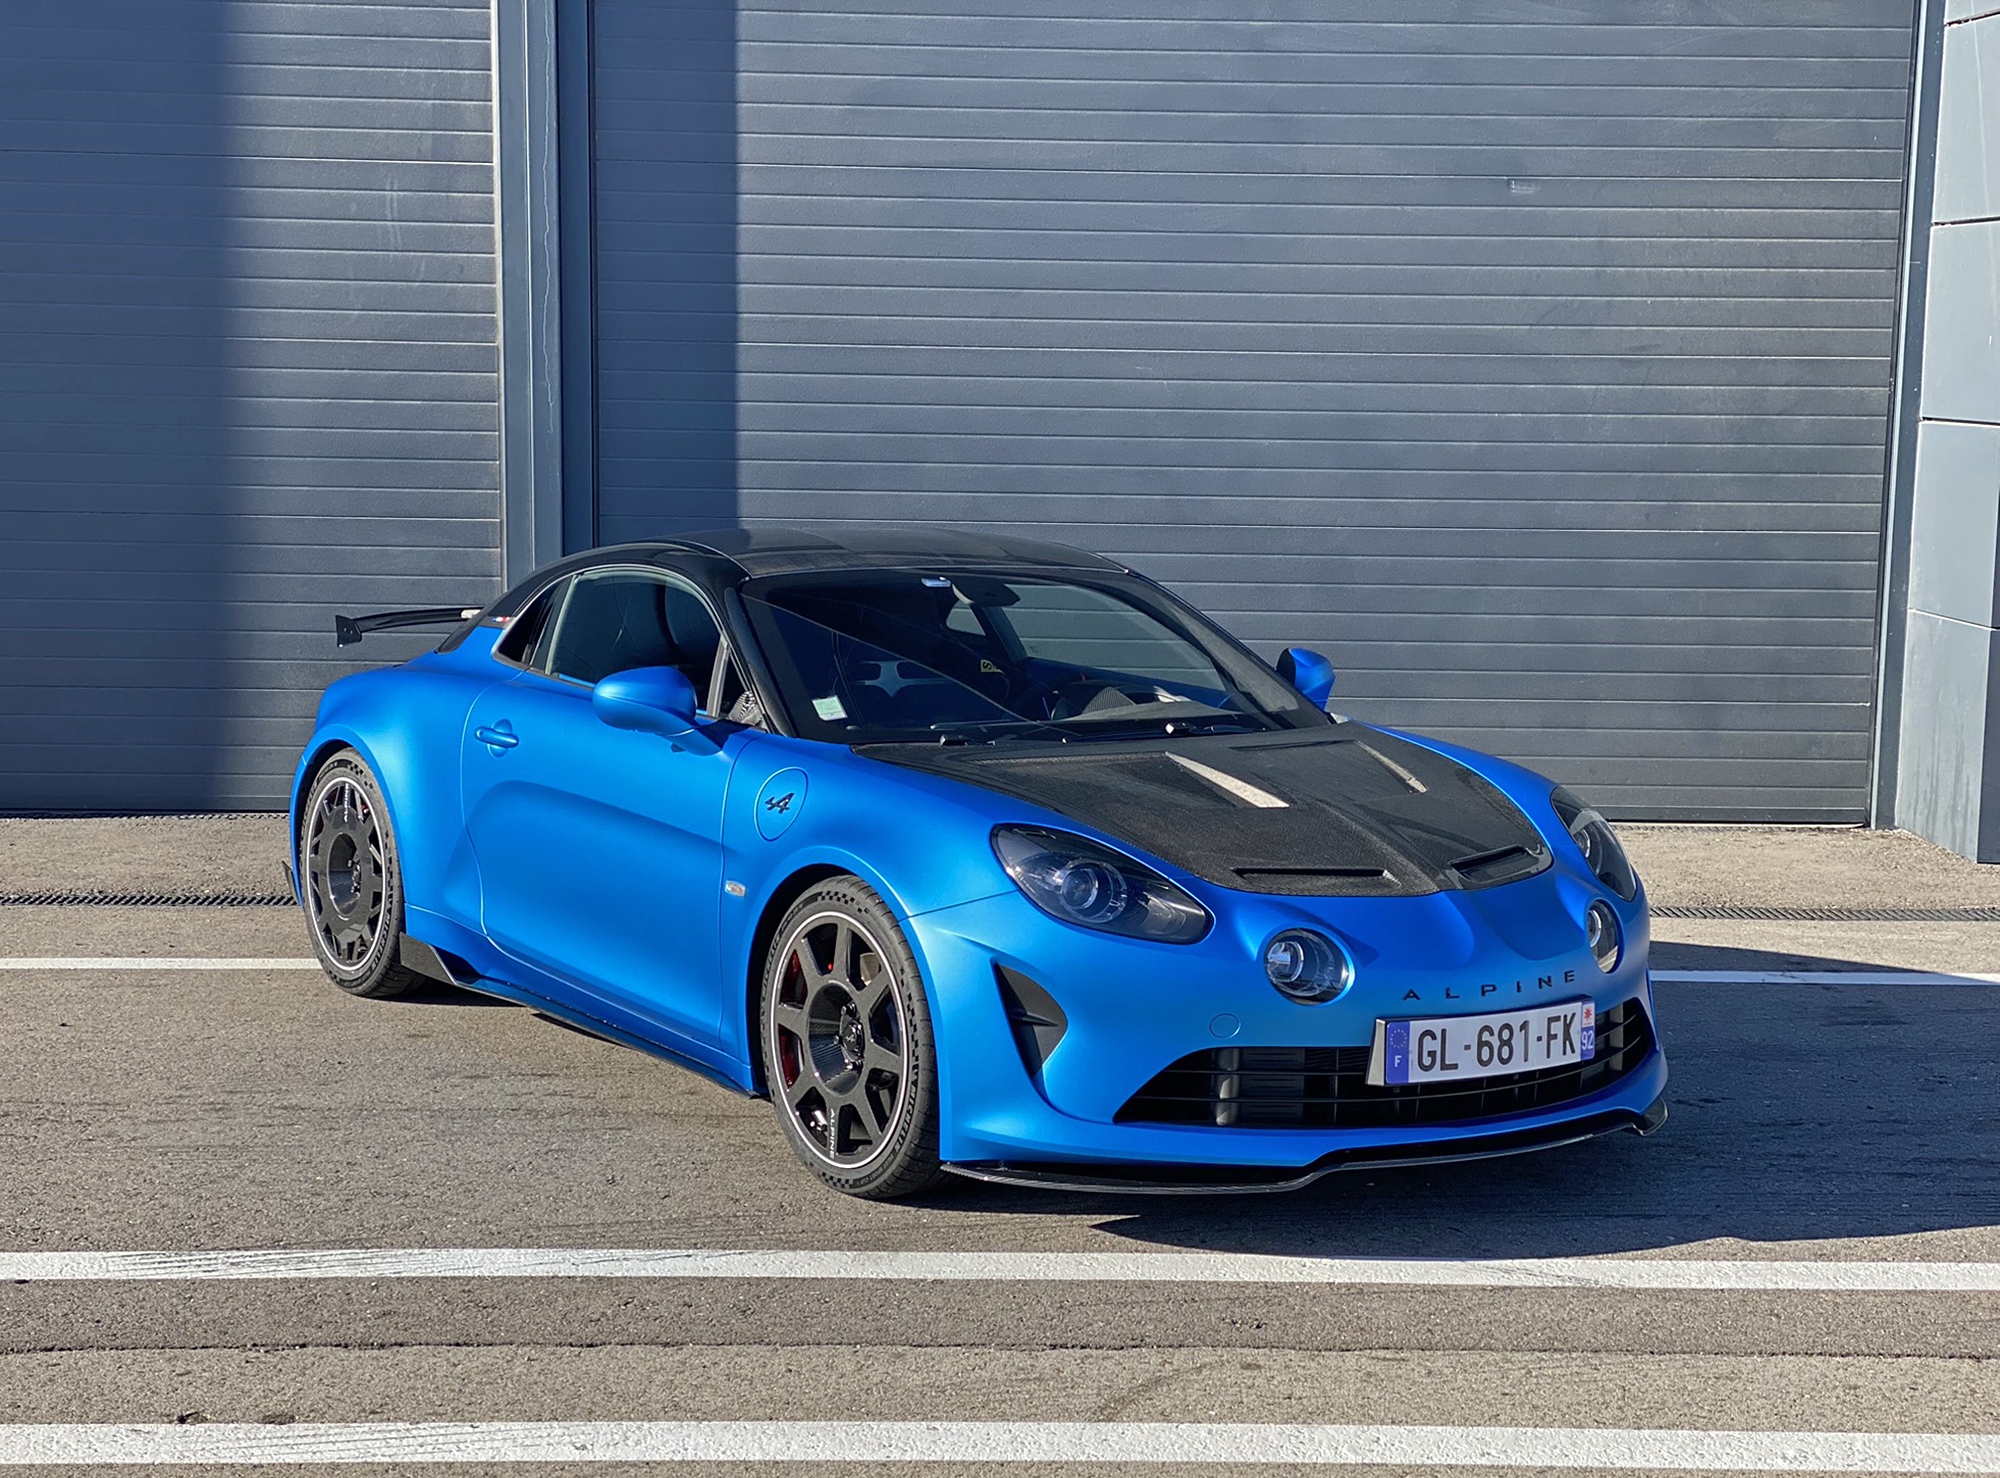 Bespoke Body Kit for Alpine A110 R: Elevate the Look of Your Sports Car